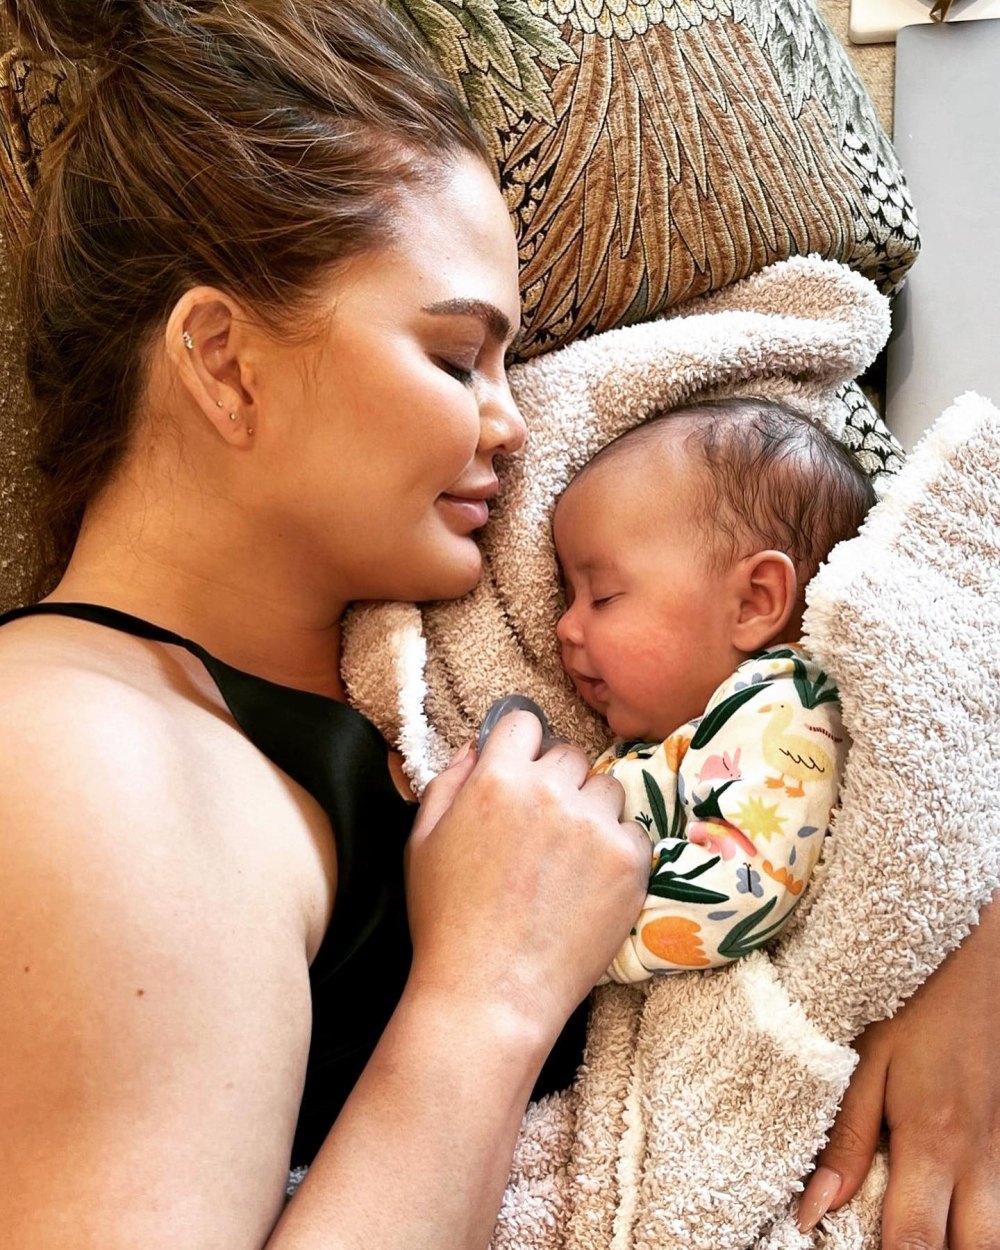 Chrissy Teigen Embraces Lifetime Scars and Body Imperfections While Sitting Nude in the Bath With Daughter Esti 2